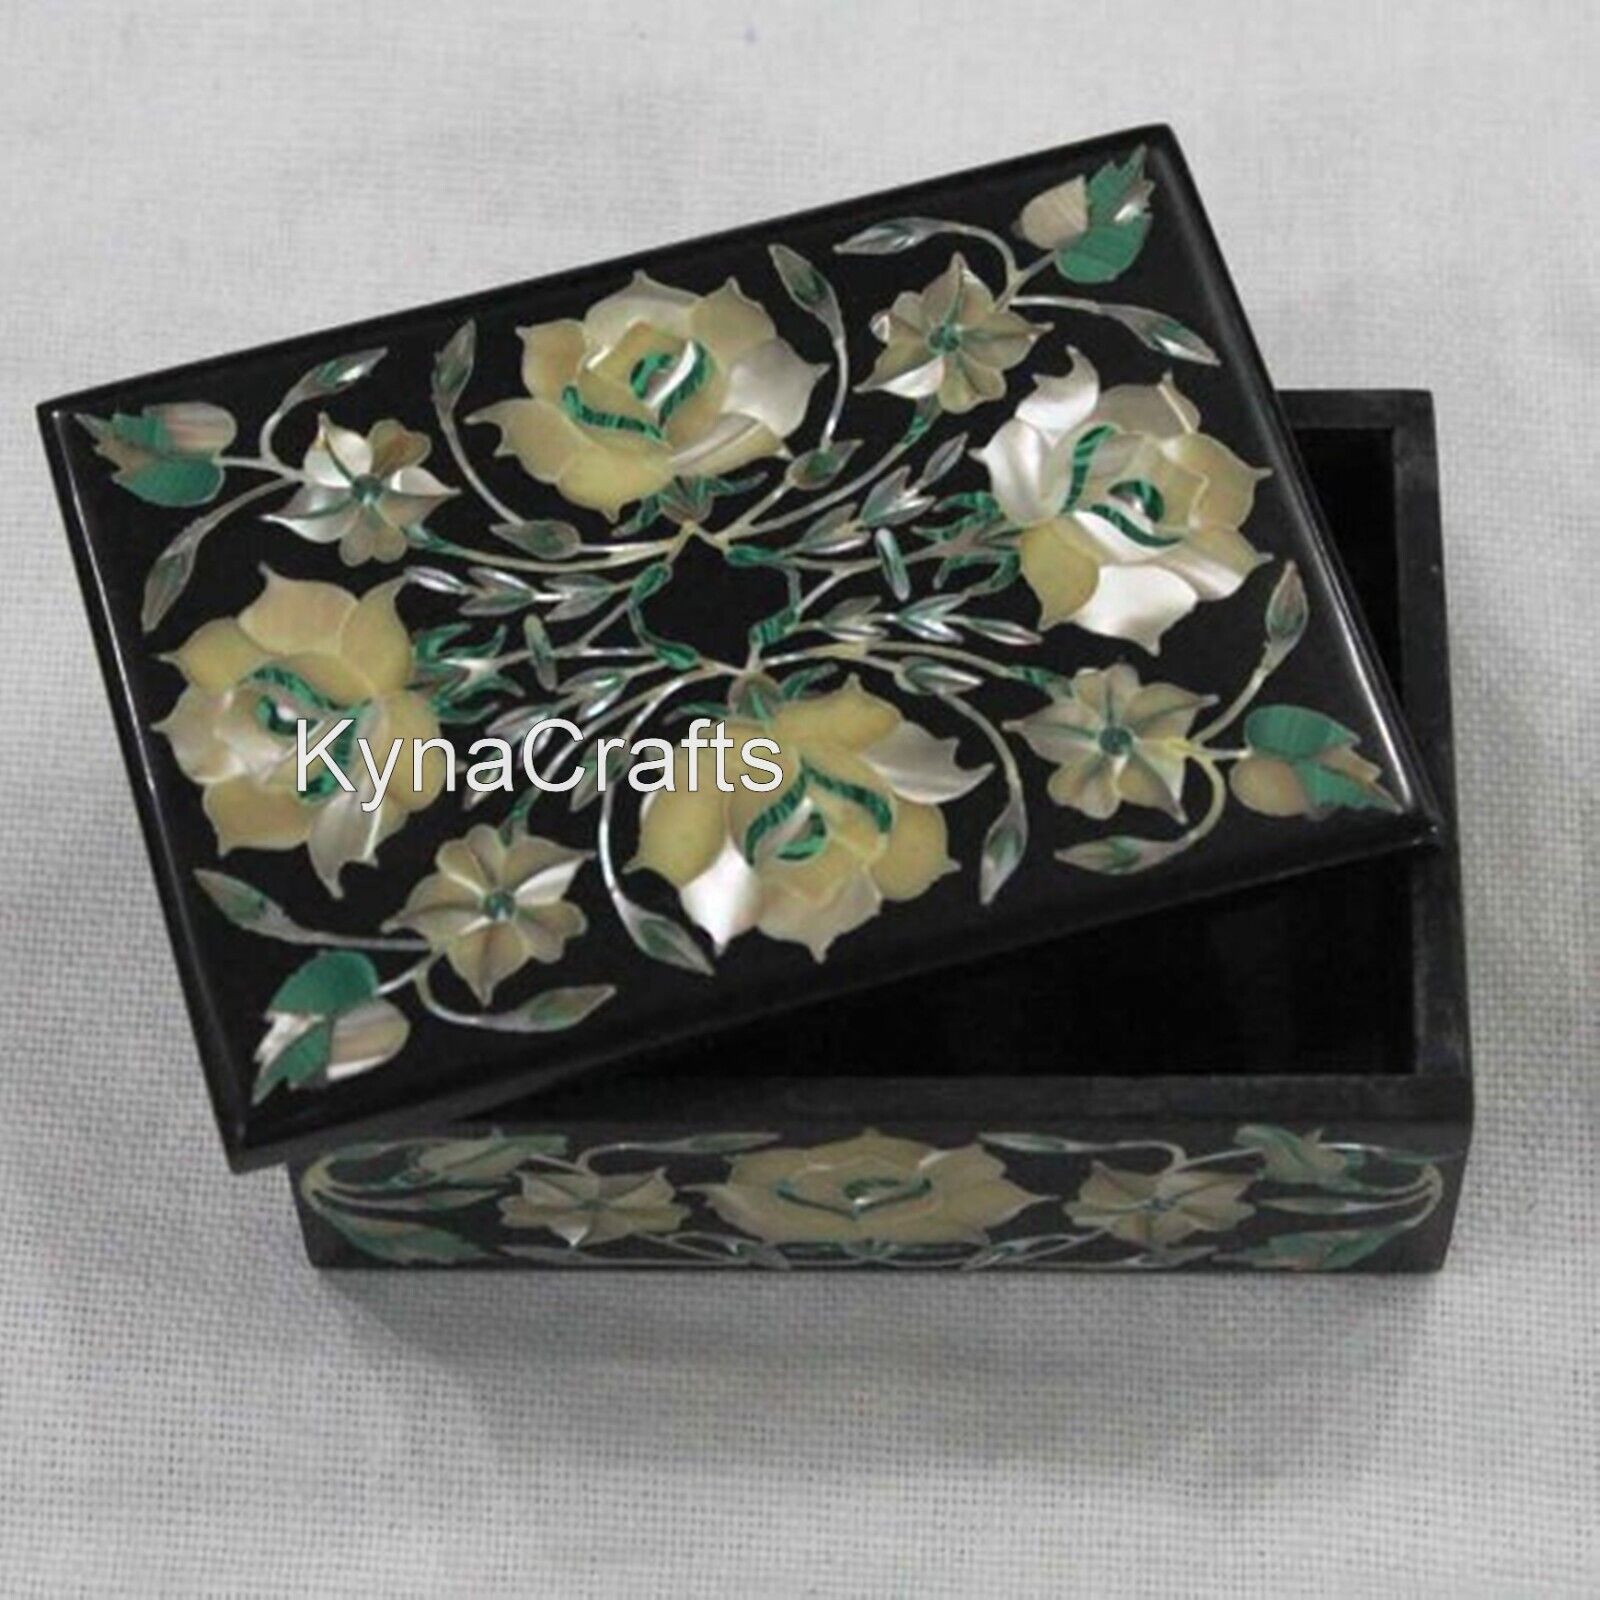 6 x 4 Inches Black Marble Jewelry Box Mother of Pearl Inlay Work Decorative Box